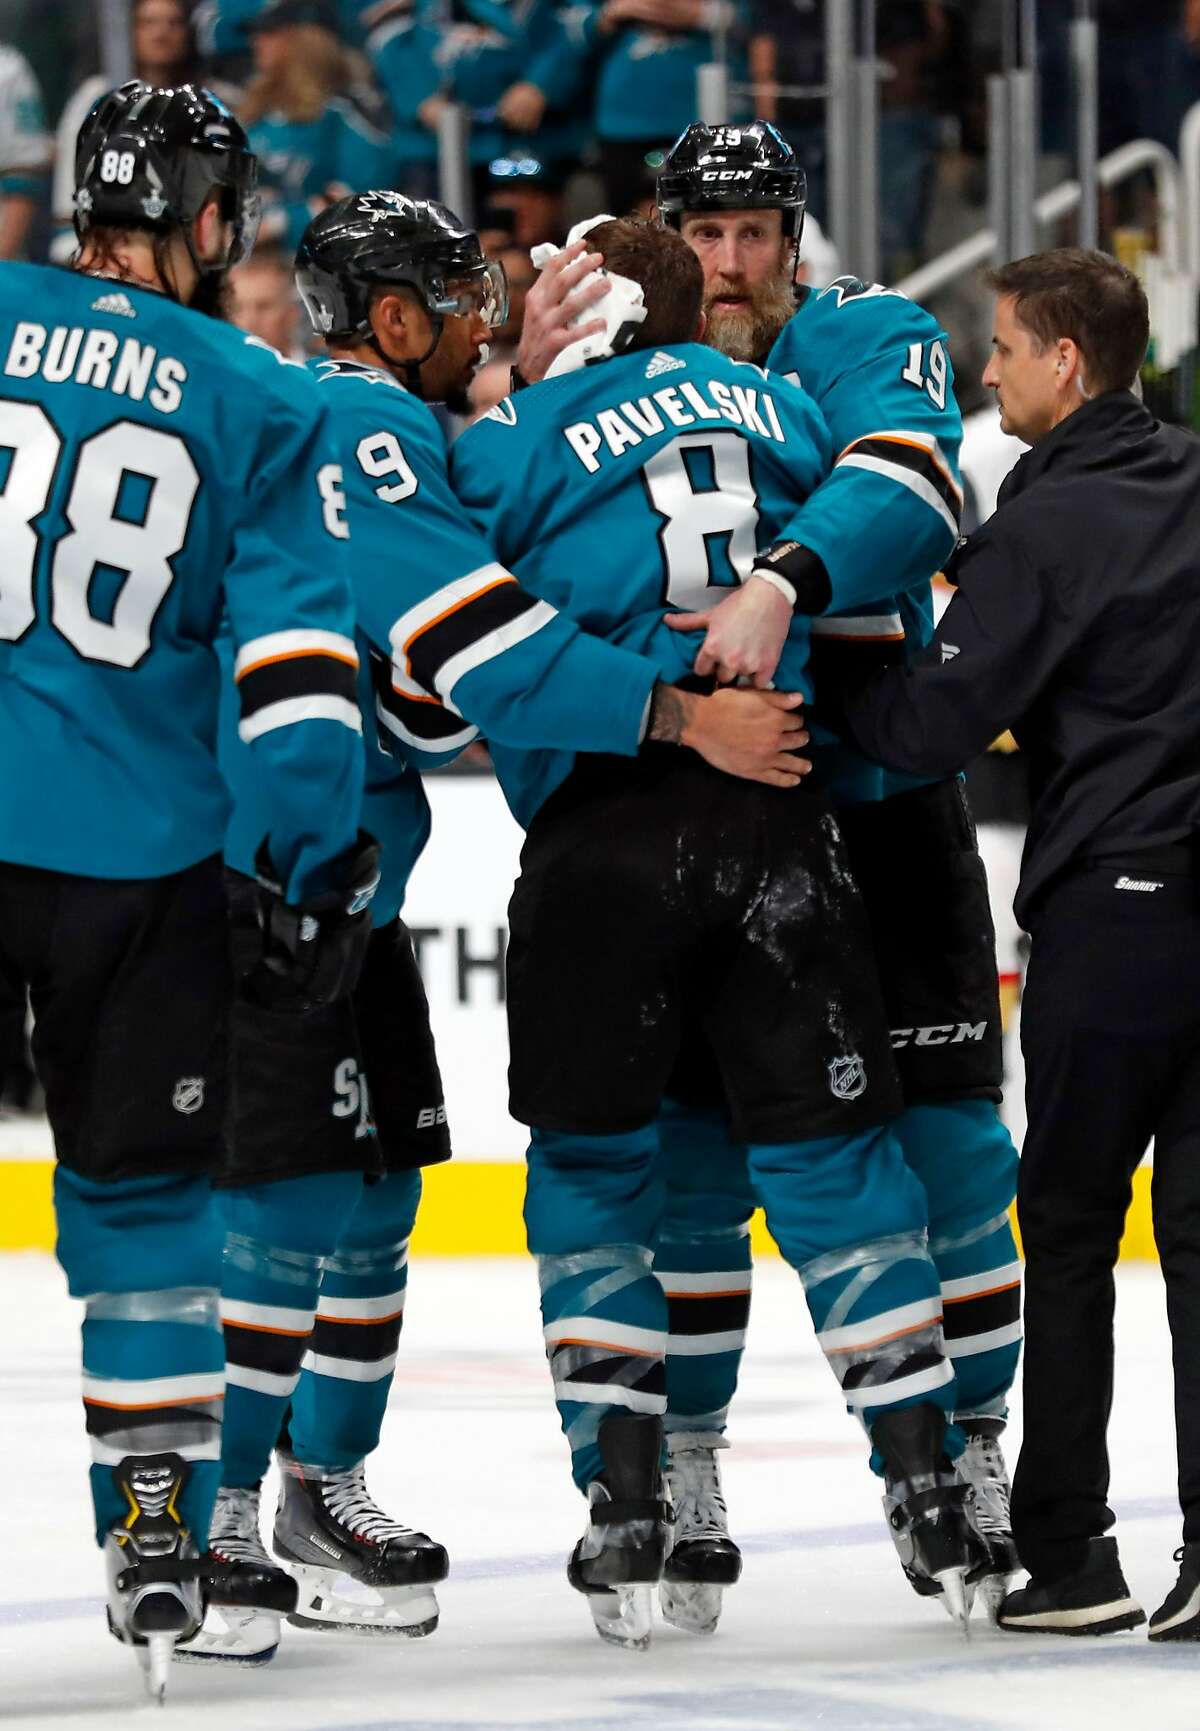 San Jose Sharks' Joe Thornton helps an injured Joe Pavelski ioff the ice in 3rd period against Vegas Golden Knights during Game 7 of NHL Western Conference 1st round playoff game at SAP Center in San Jose, Calif., on Tuesday, April 23, 2019.